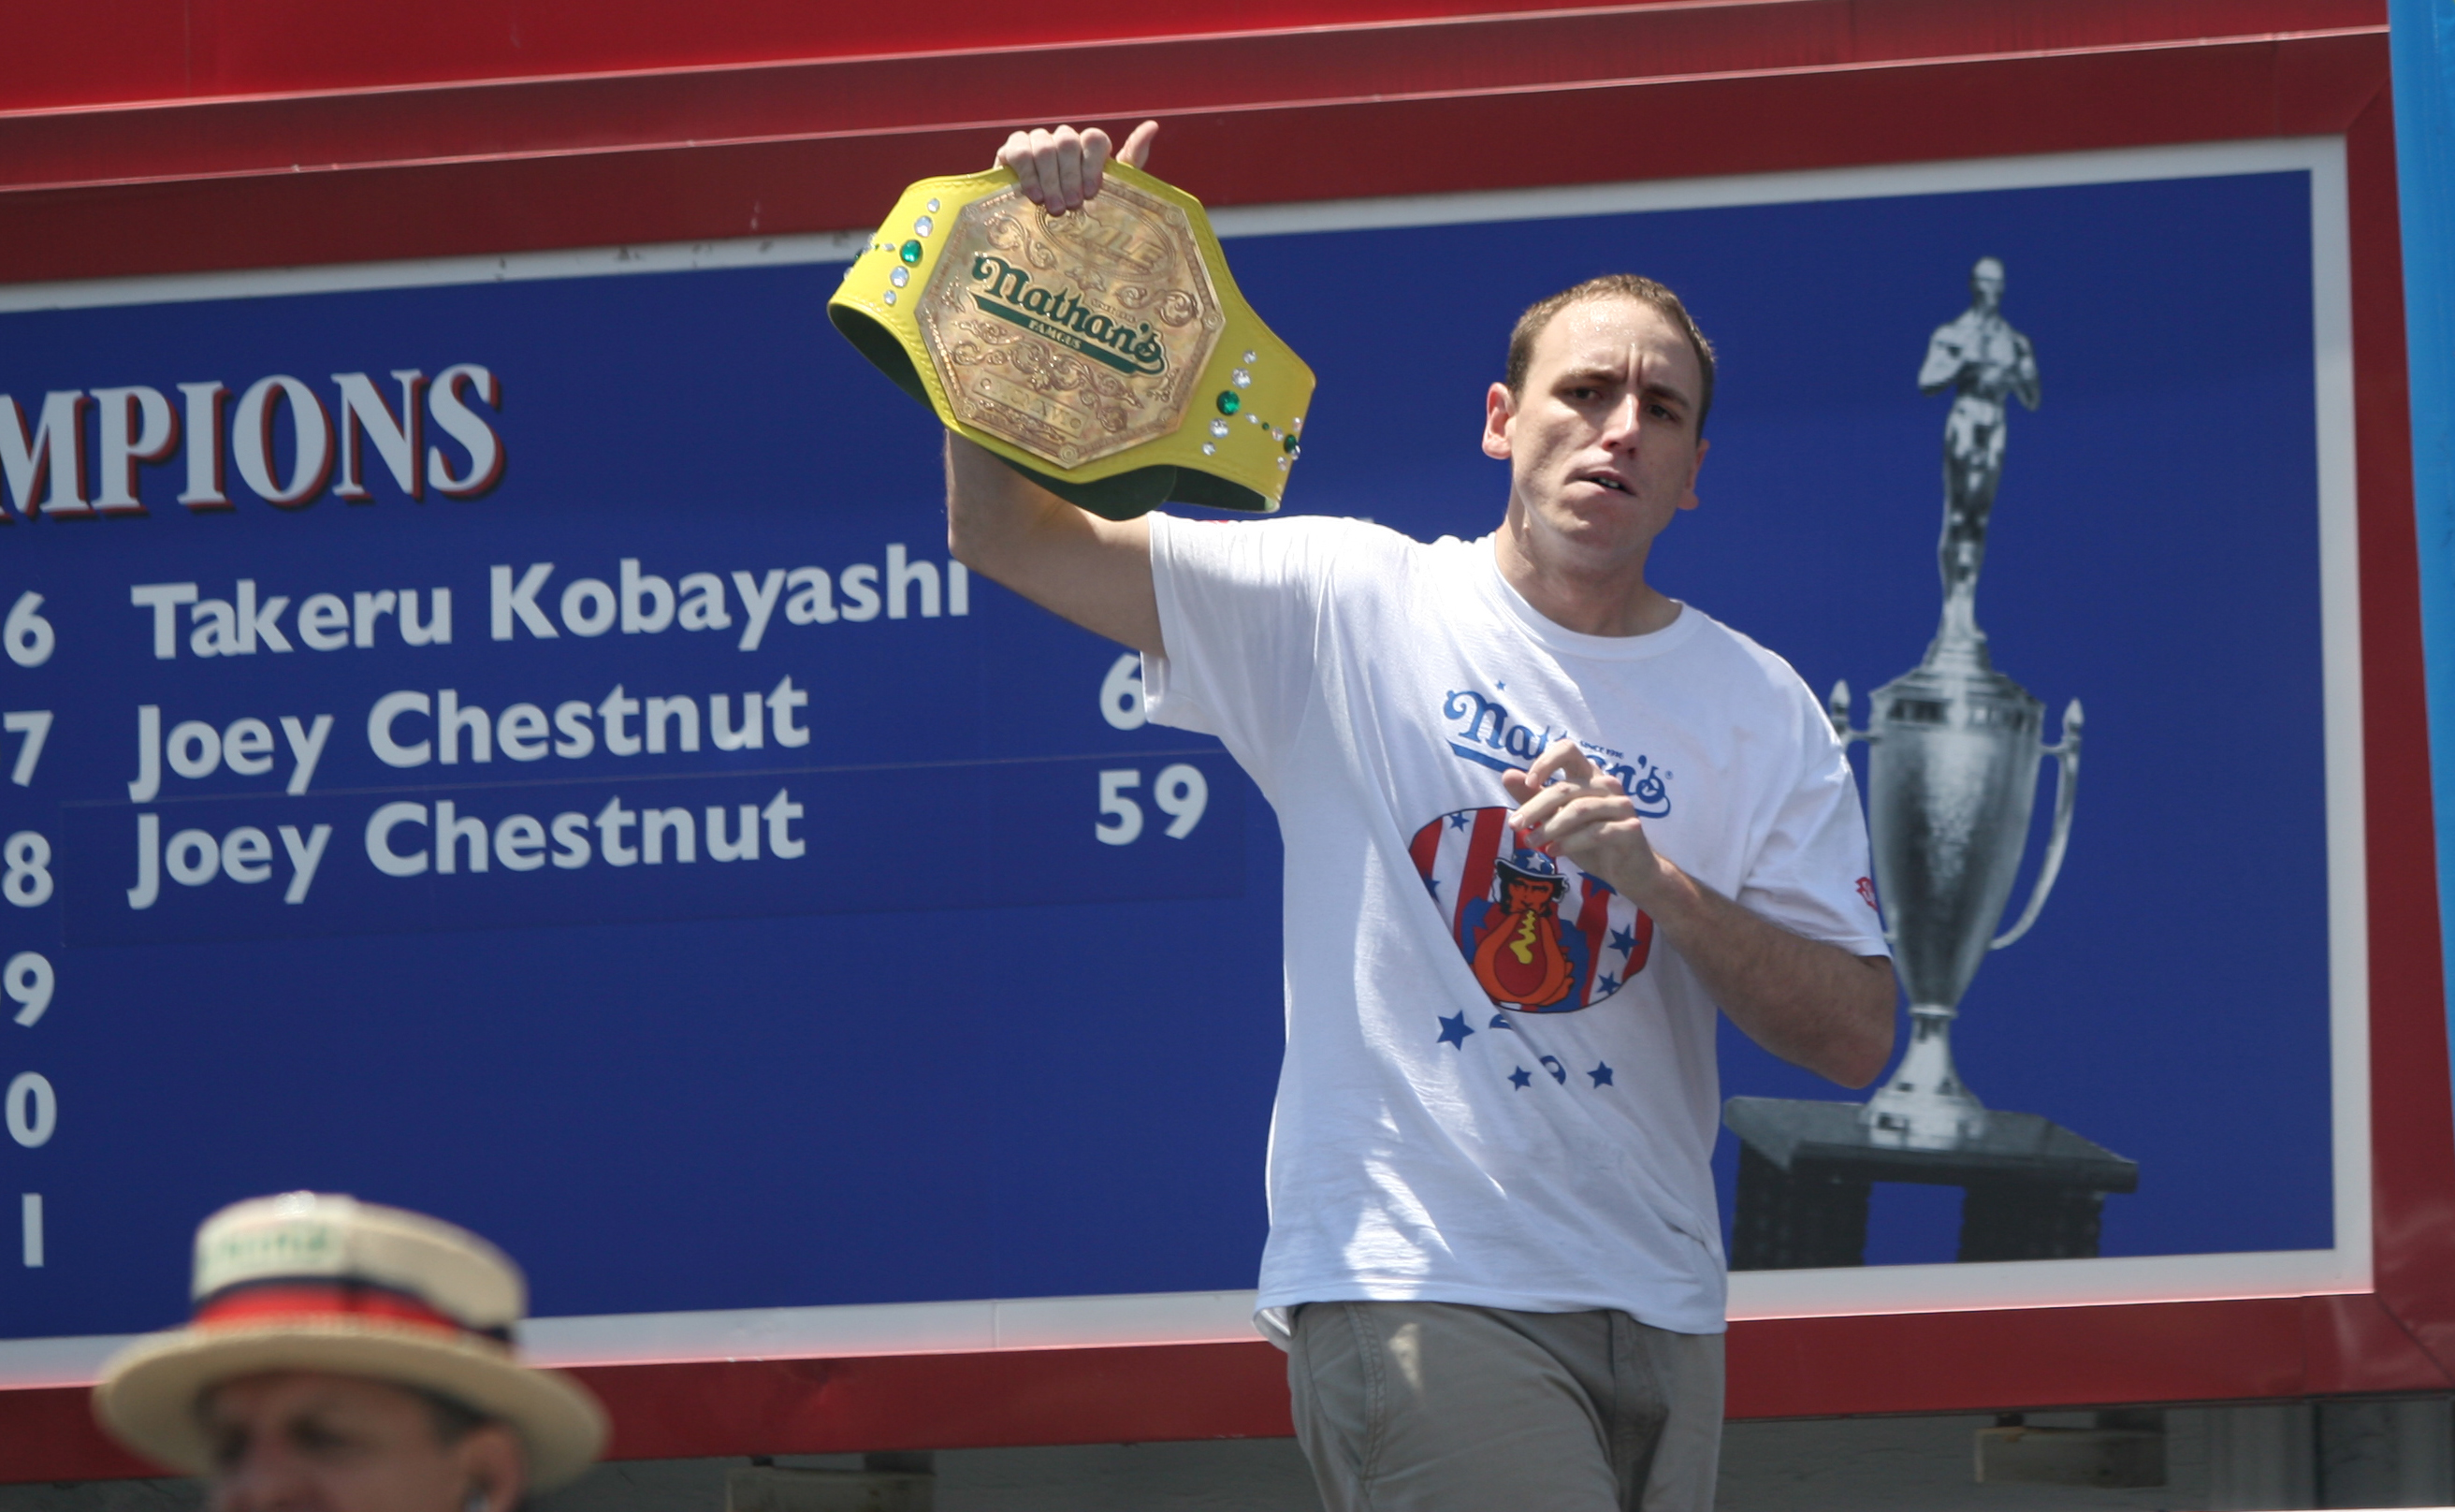 NEW YORK - JULY 4: Joey Chestnut of San Jose, California walks on stage holding his old champion belt as the Nathan's Famous Fourth of July hot dog eating contest begins on July 4, 2009 in Coney Island in the Brooklyn borough of New York City. Chestnut de